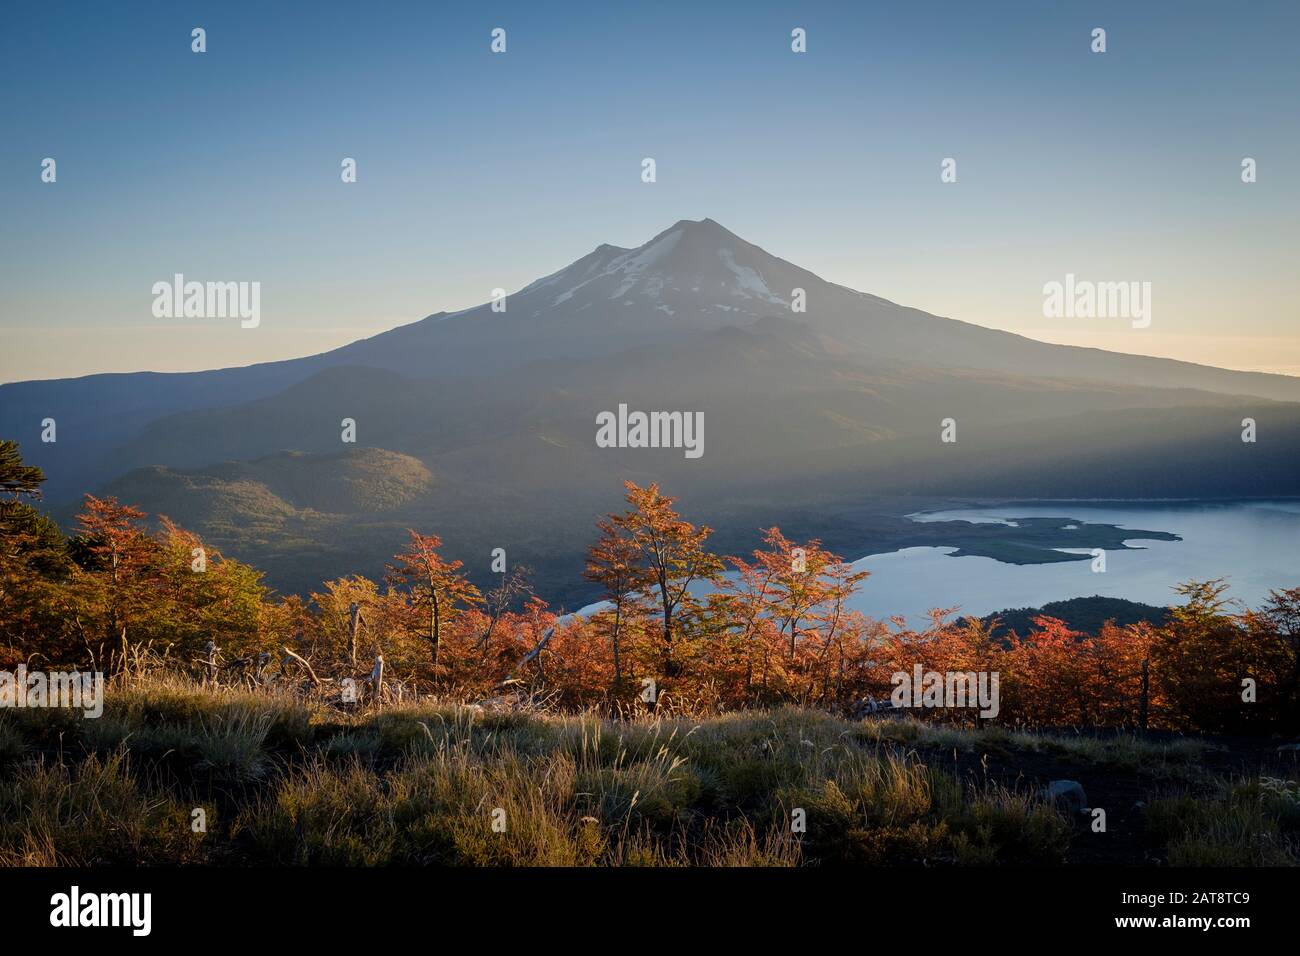 Southern beeches (Nothofagus sp.) with Llaima volcano in the background. Conguillio National Park. La Araucania. Chile. Stock Photo